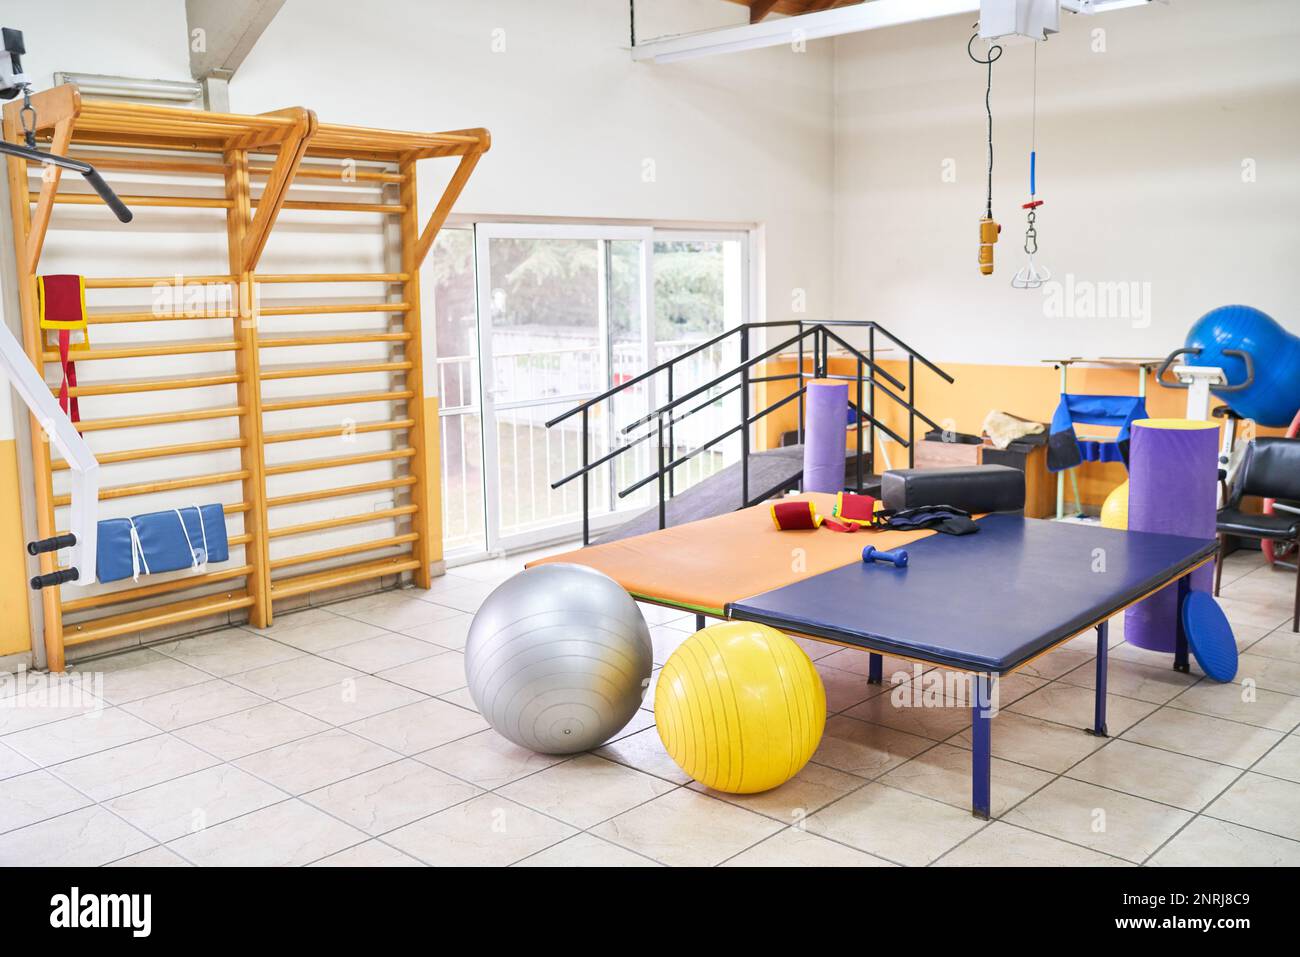 Interior of rehabilitation center with bed and various exercise equipment in room Stock Photo